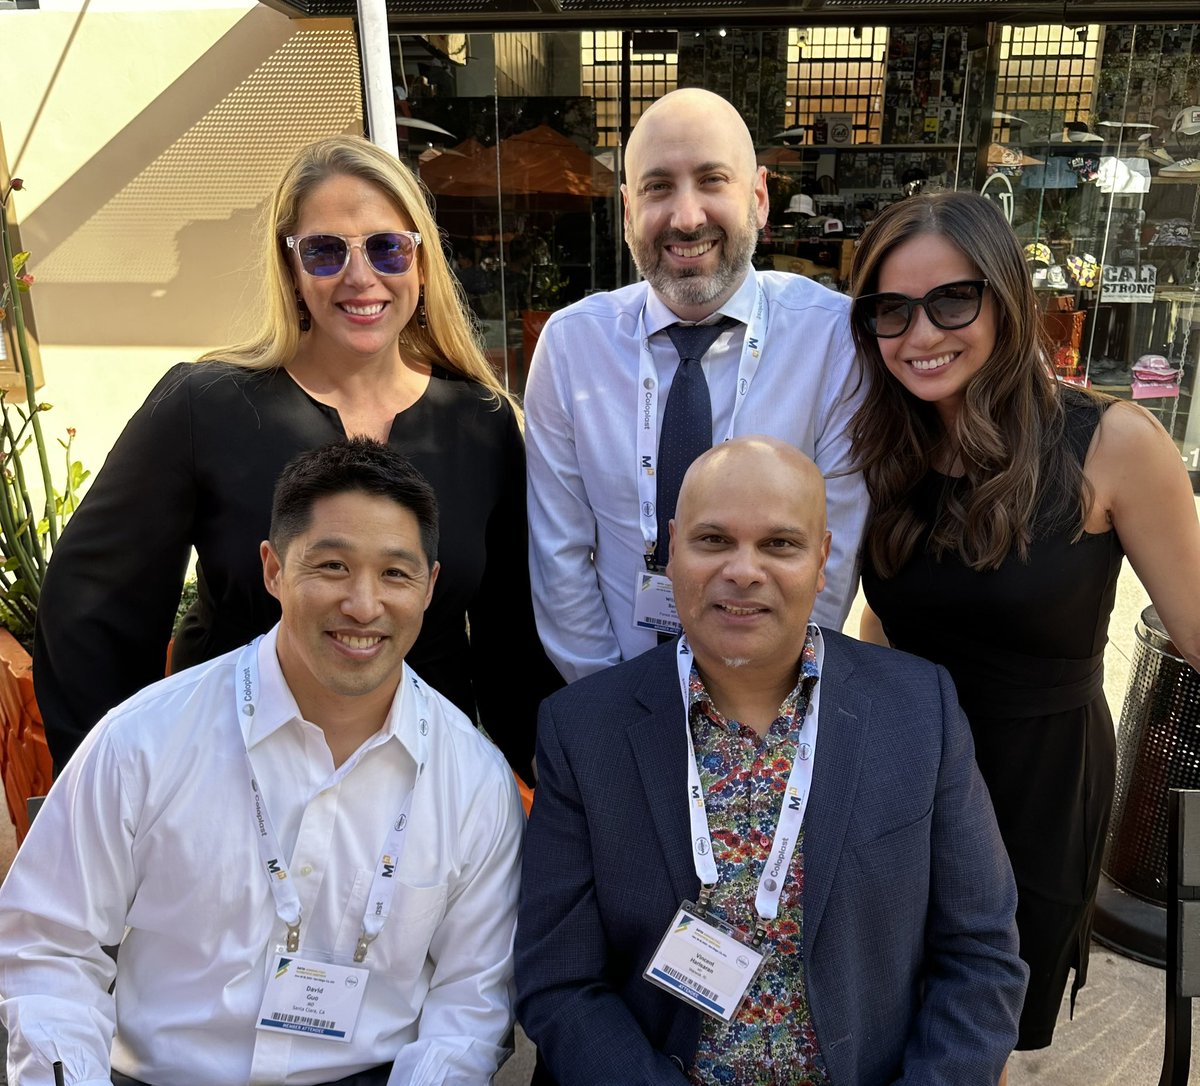 The best part about meetings is spending time with the fellowship family #SMSNA23 @BrownUrology @DrDaniVelez @DrRotker